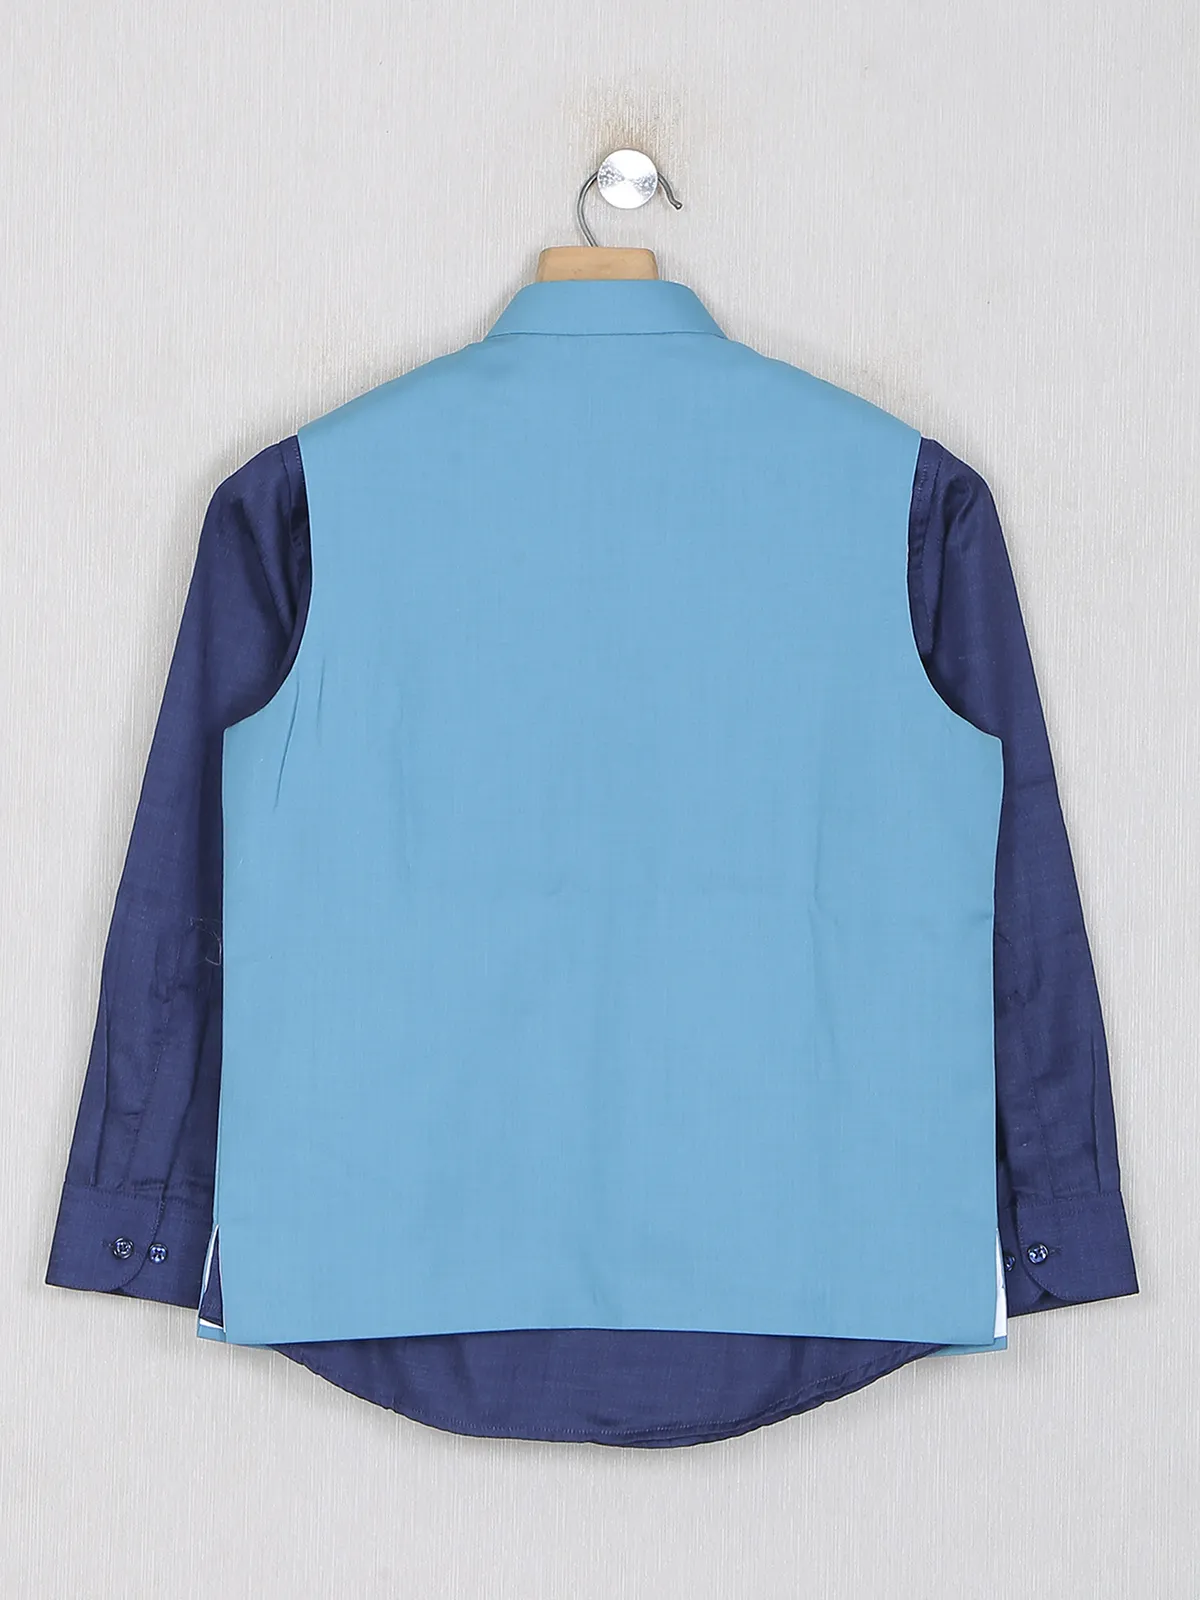 Light blue color silk plain waistcoat with shirt with in terry rayon